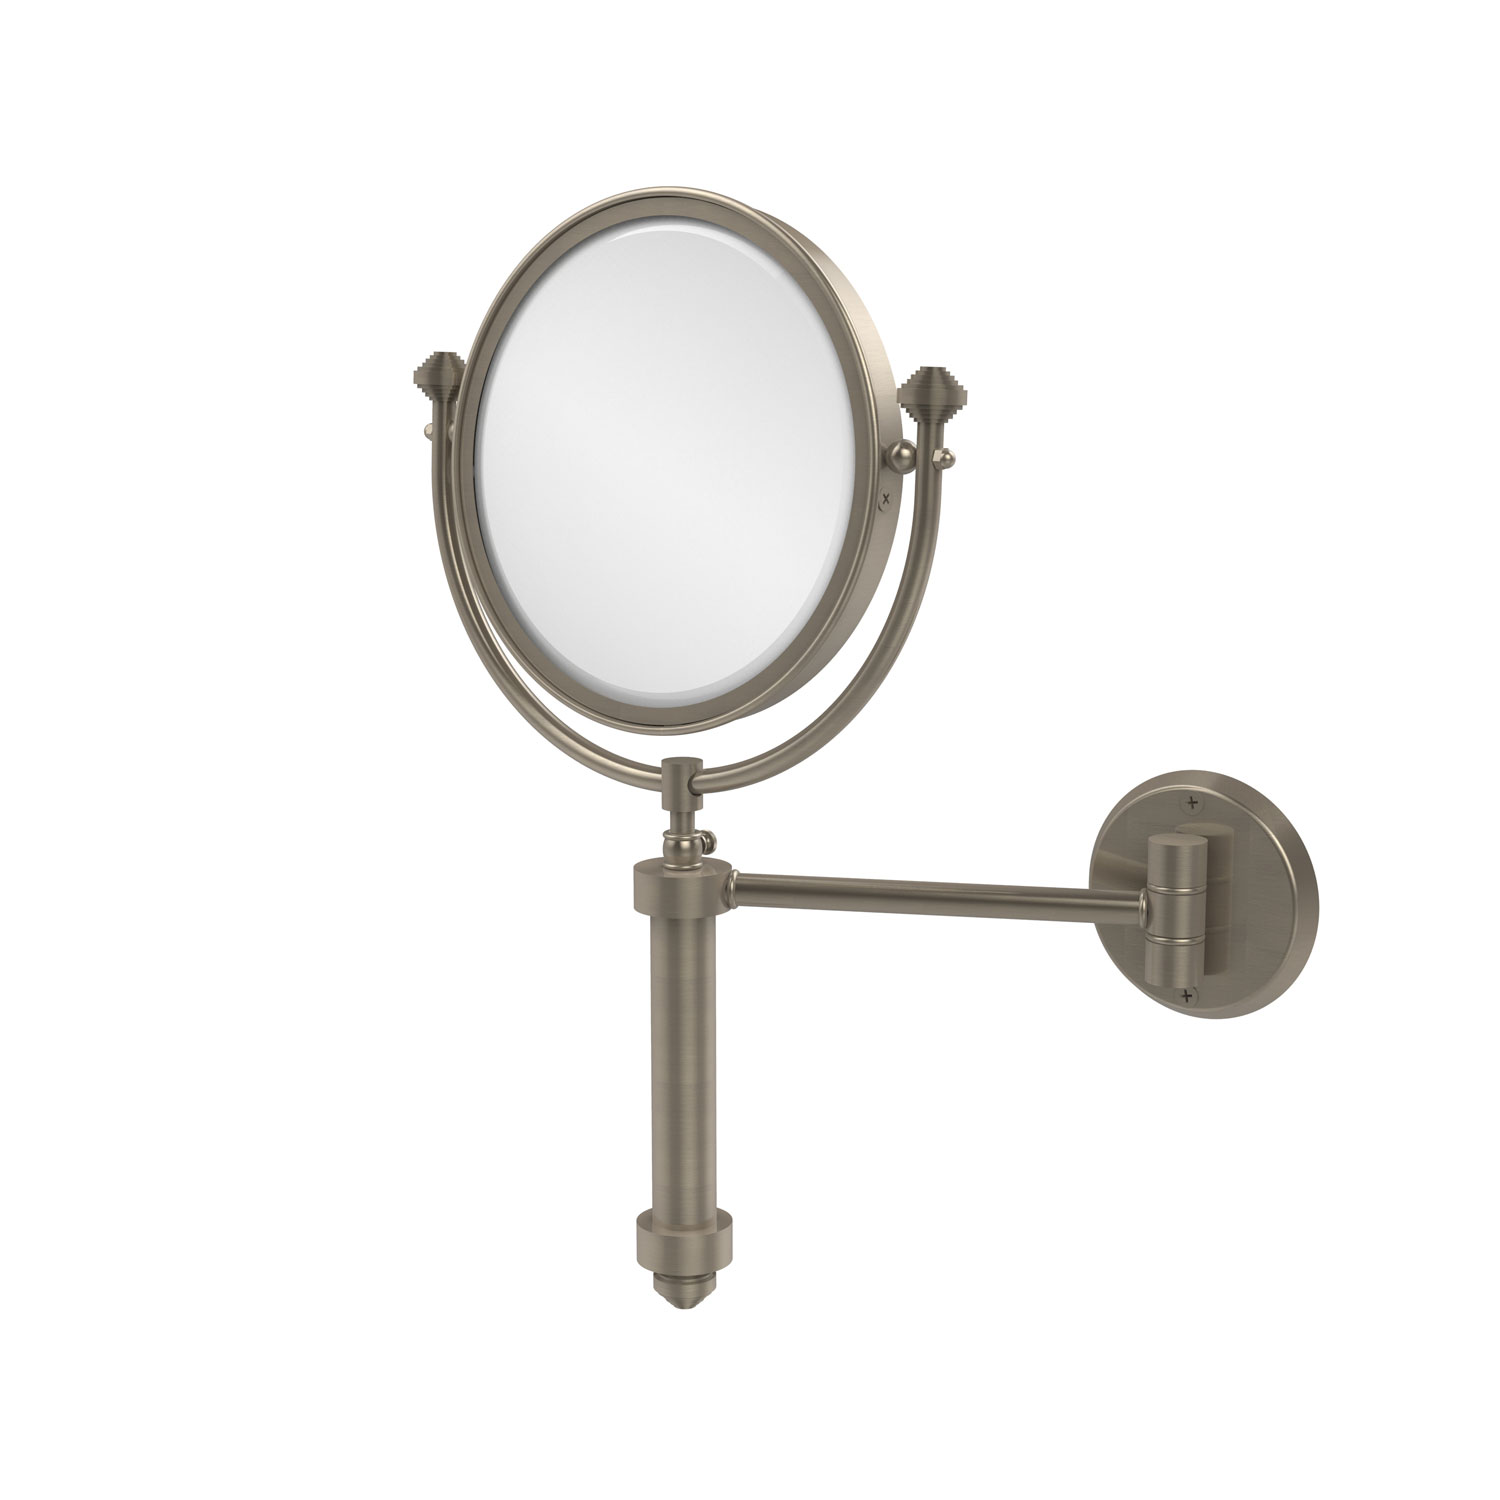 Southbeach Collection Wall Mounted Make-Up Mirror 8 Inch Diameter With 2X Magnification, Antique Pewter